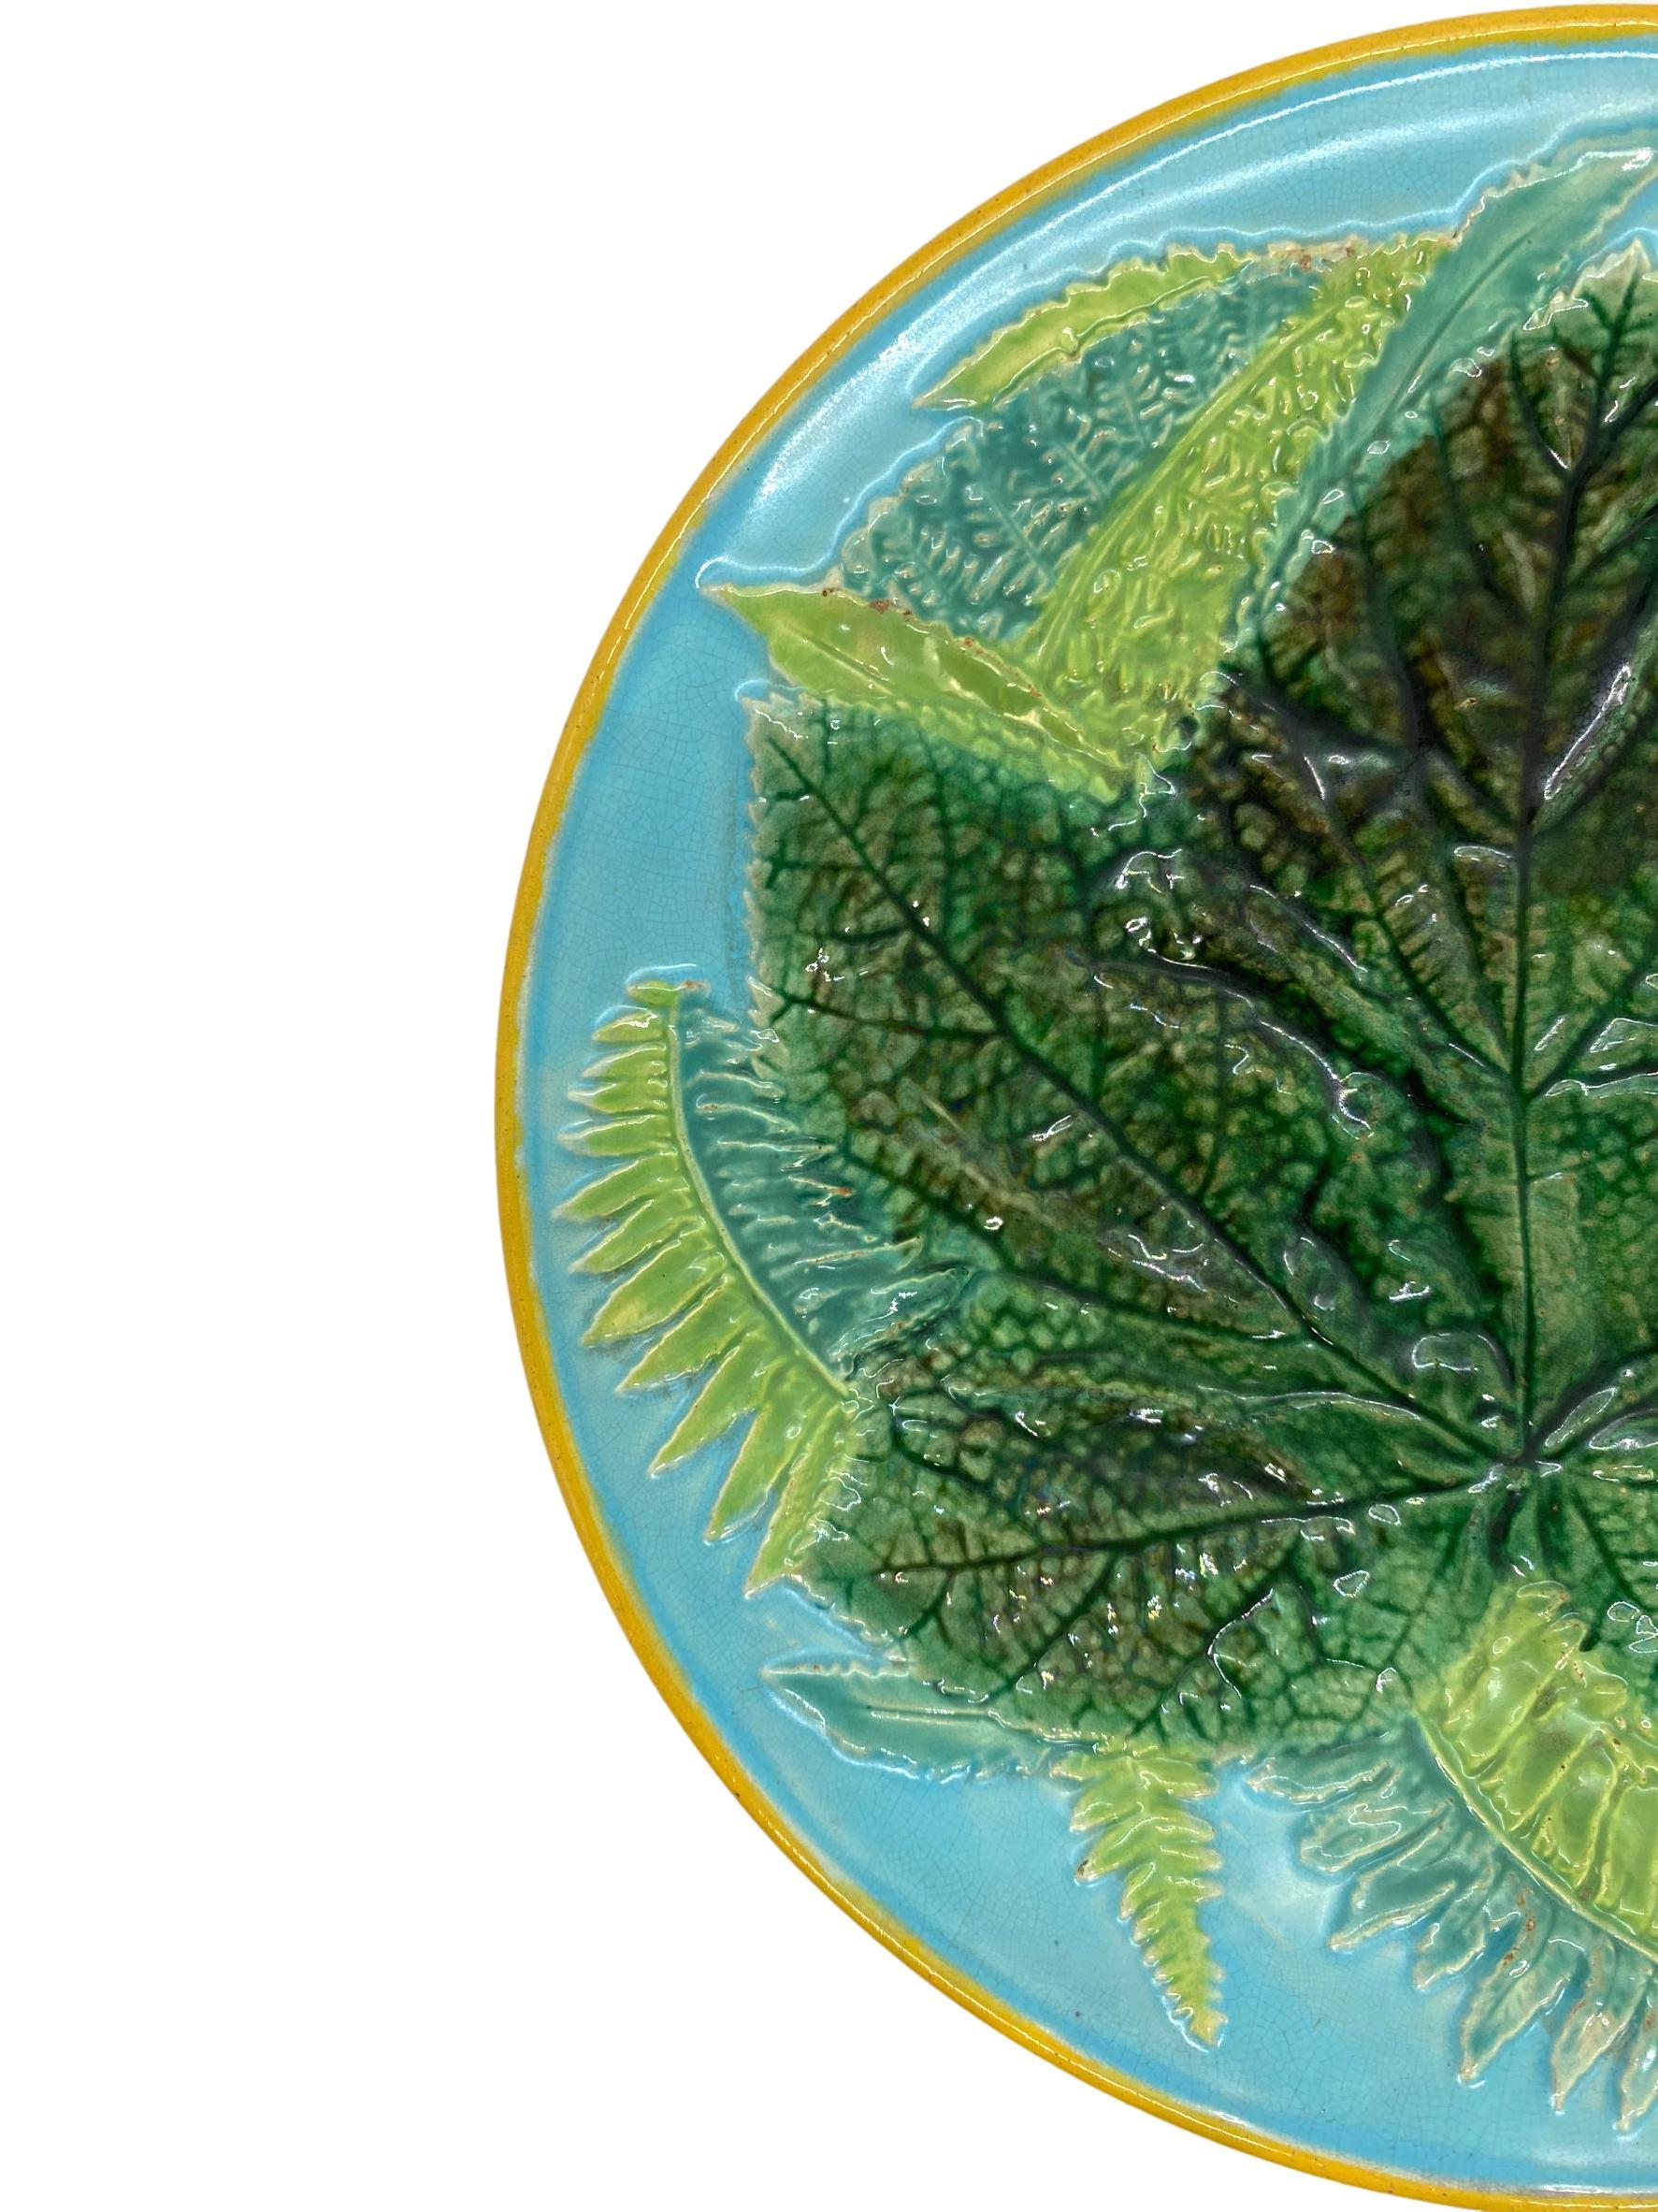 *# 2 is the one with the backrim chip*George Jones Majolica Maple Leaf and Ferns Plate on Turquoise, English, ca. 1873, the relief molded dish with a central green-glazed maple leaf with Ferns on a turquoise ground, the rim banded in ochre, painted